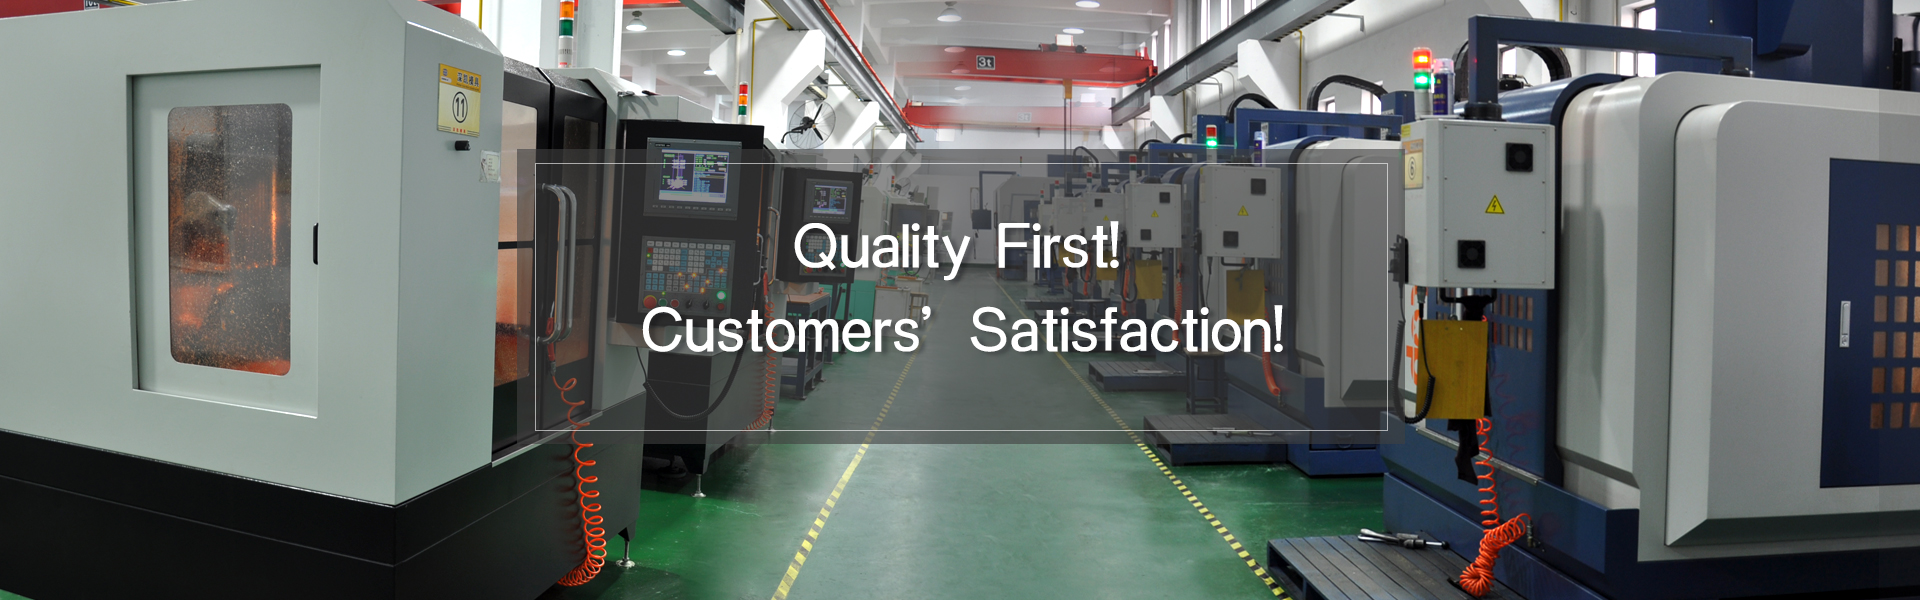 Quality First! Customers’ Satisfaction!